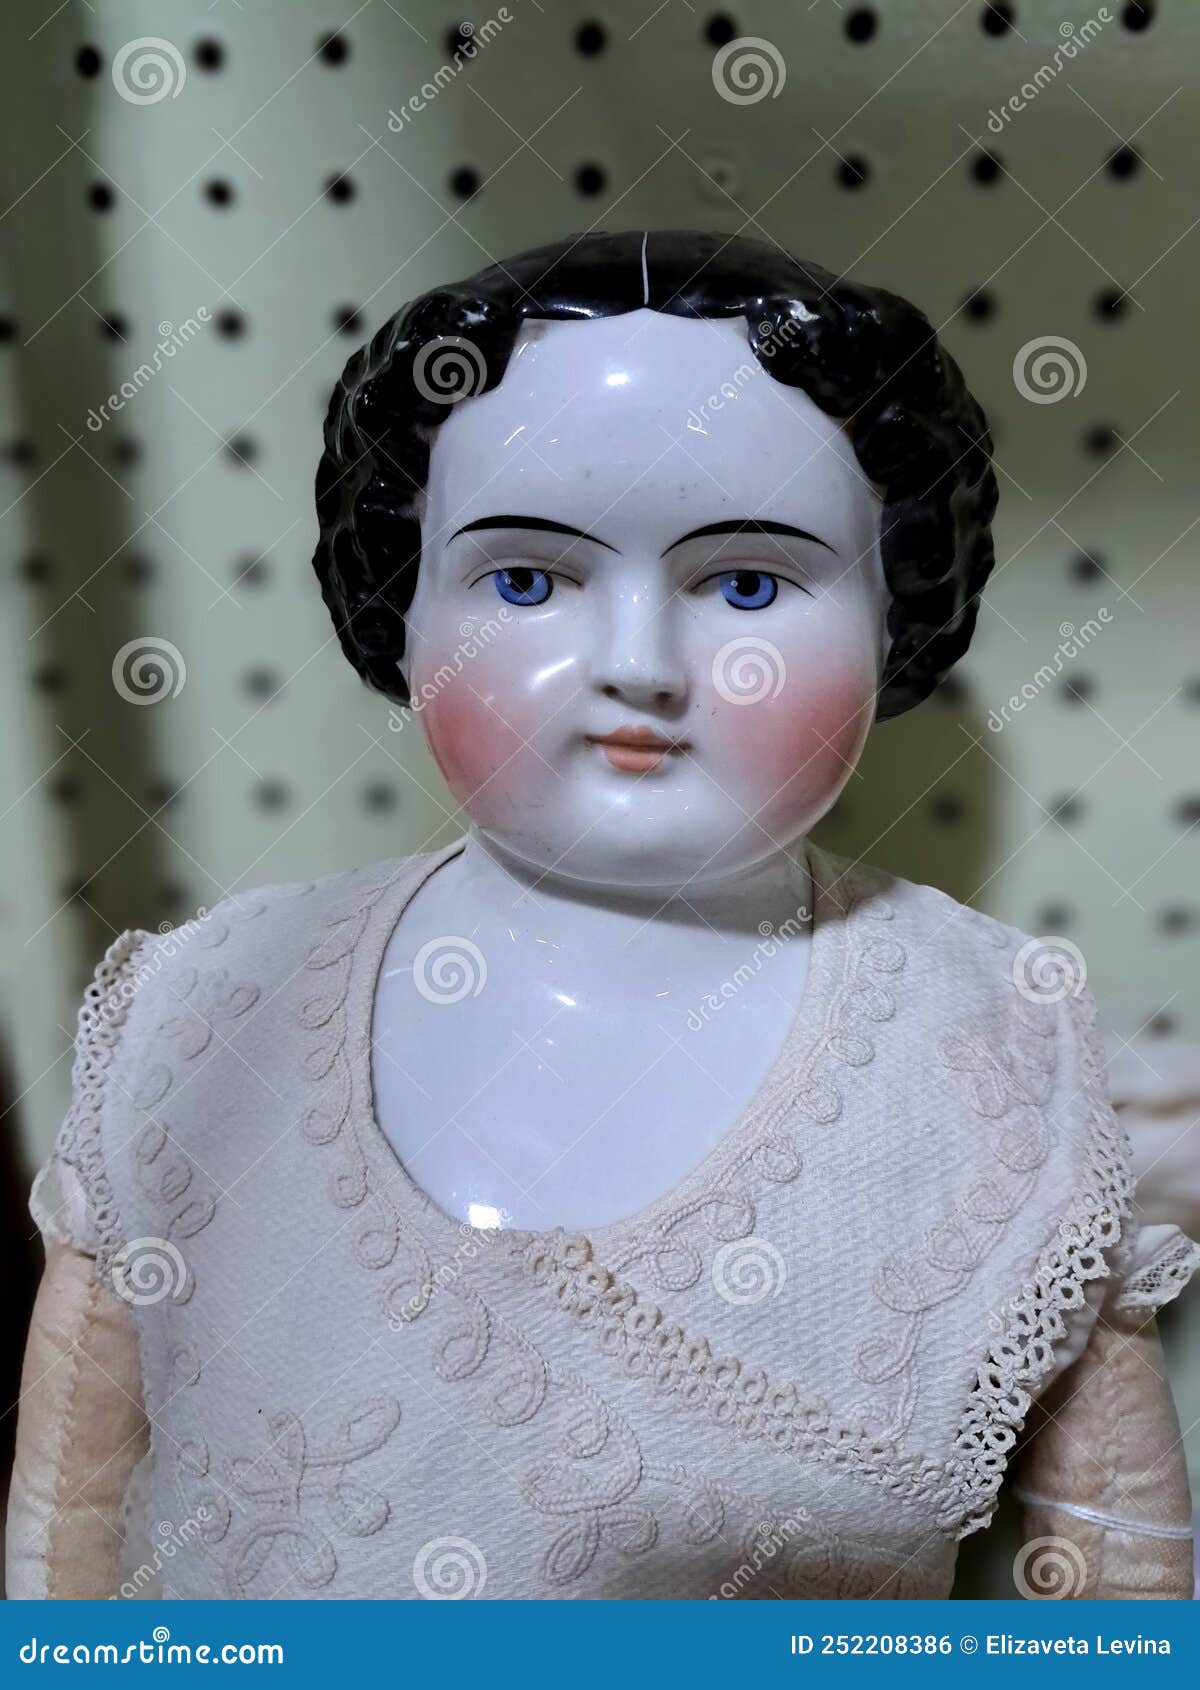 Head and Torso of an Antique Porcelain Doll with Blue Eyes, Rosy Cheeks,  and Black Hair Stock Photo - Image of cheeks, chubby: 252208386